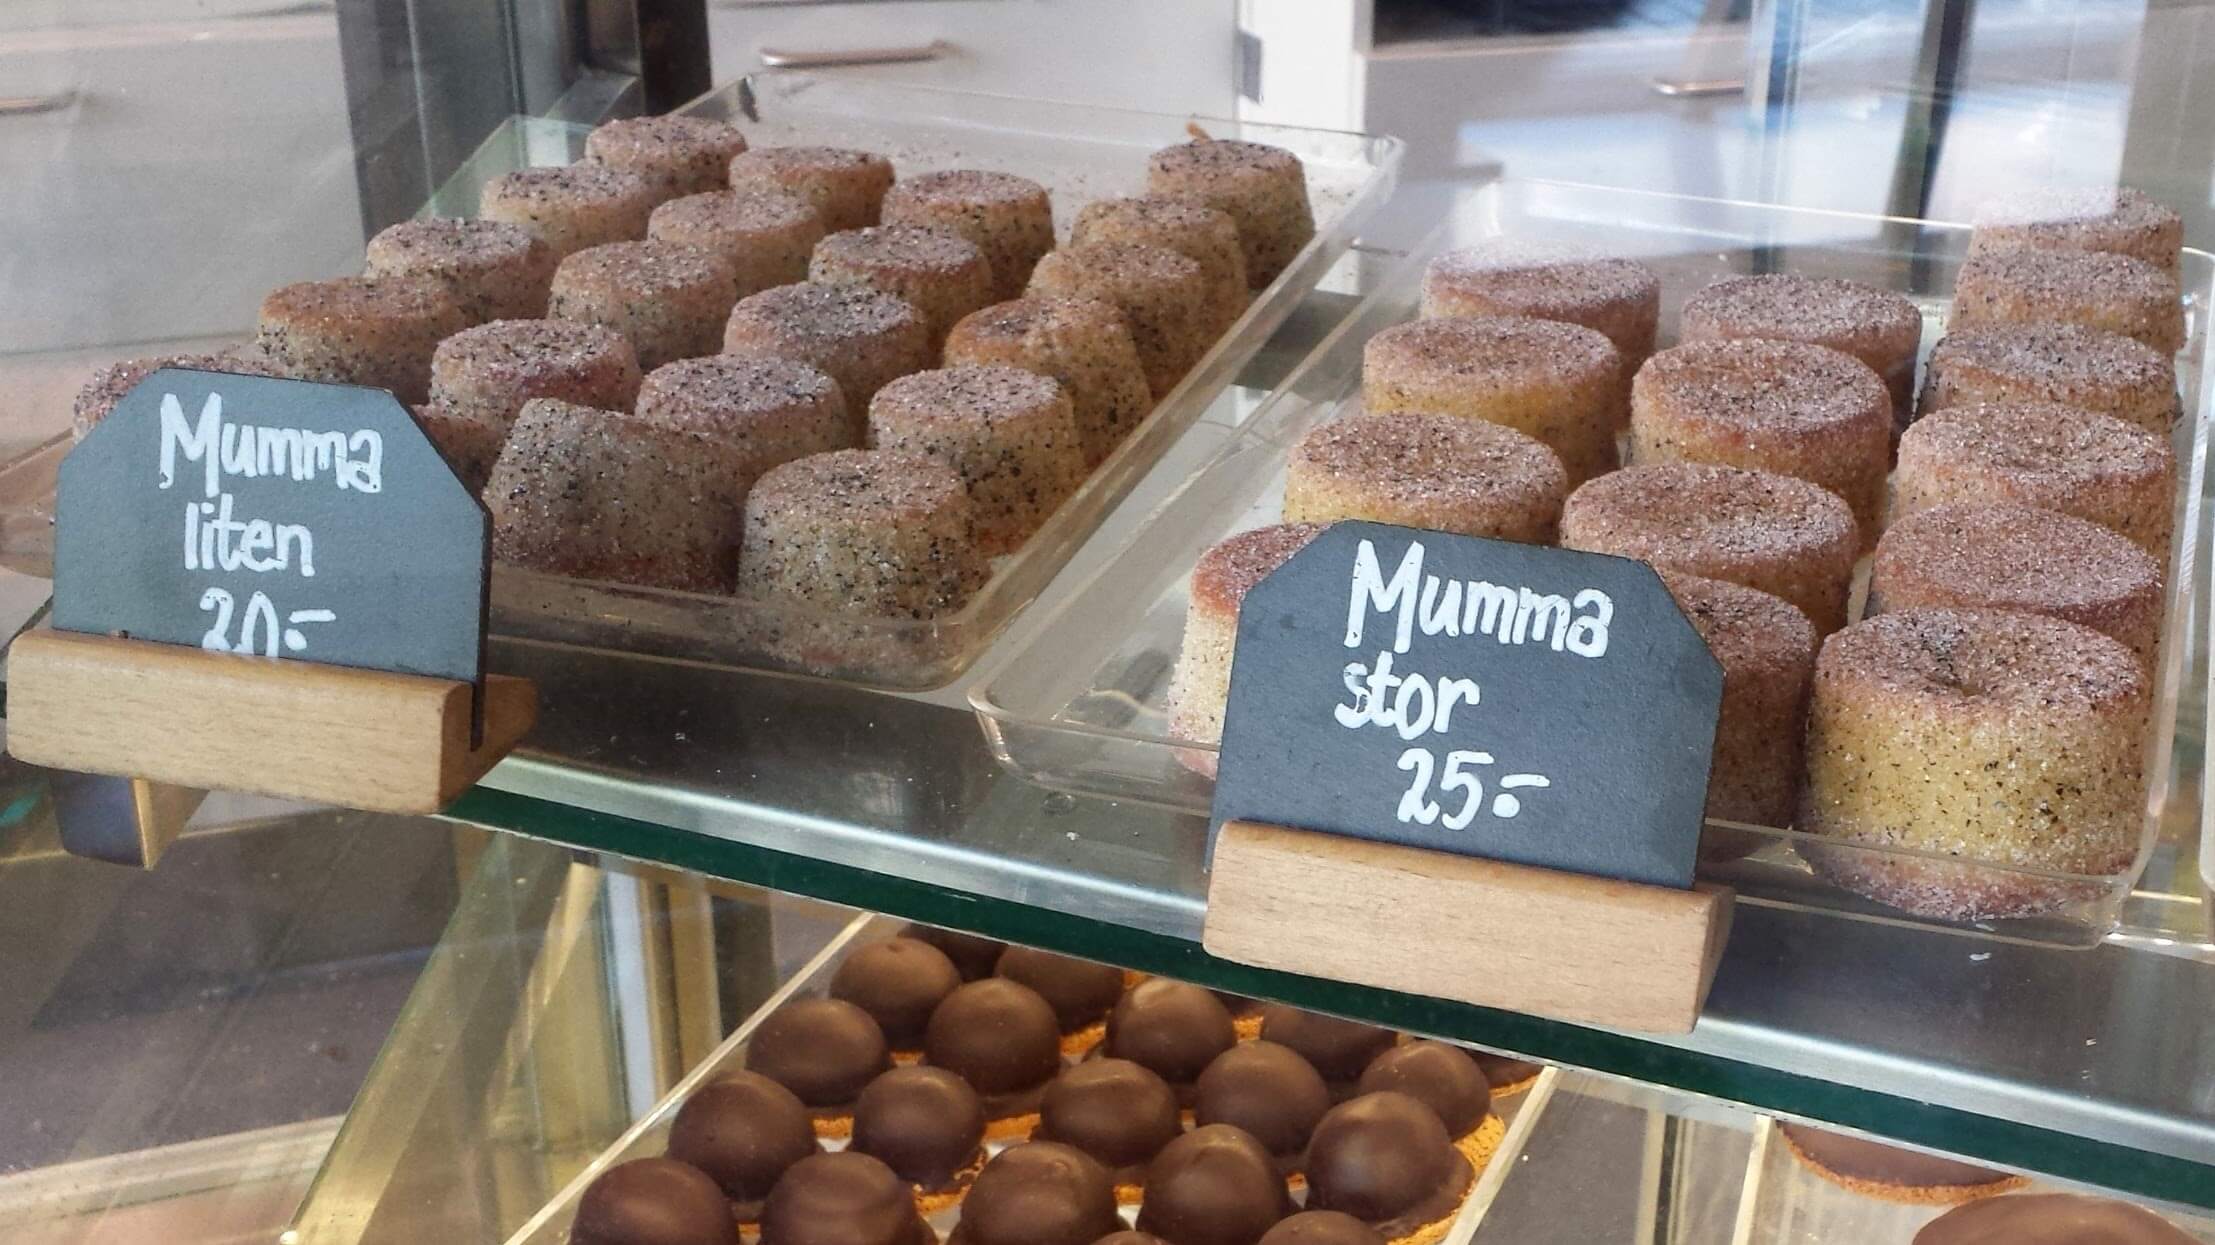 Glass case with two trays of small round cakes covered in black flecked sugar. The smaller cakes are labeled mumma liten for 20 krona, and the bigger cakes are labeled mumma stor for 25 krona. The bigger cakes are smaller than a cupcake.